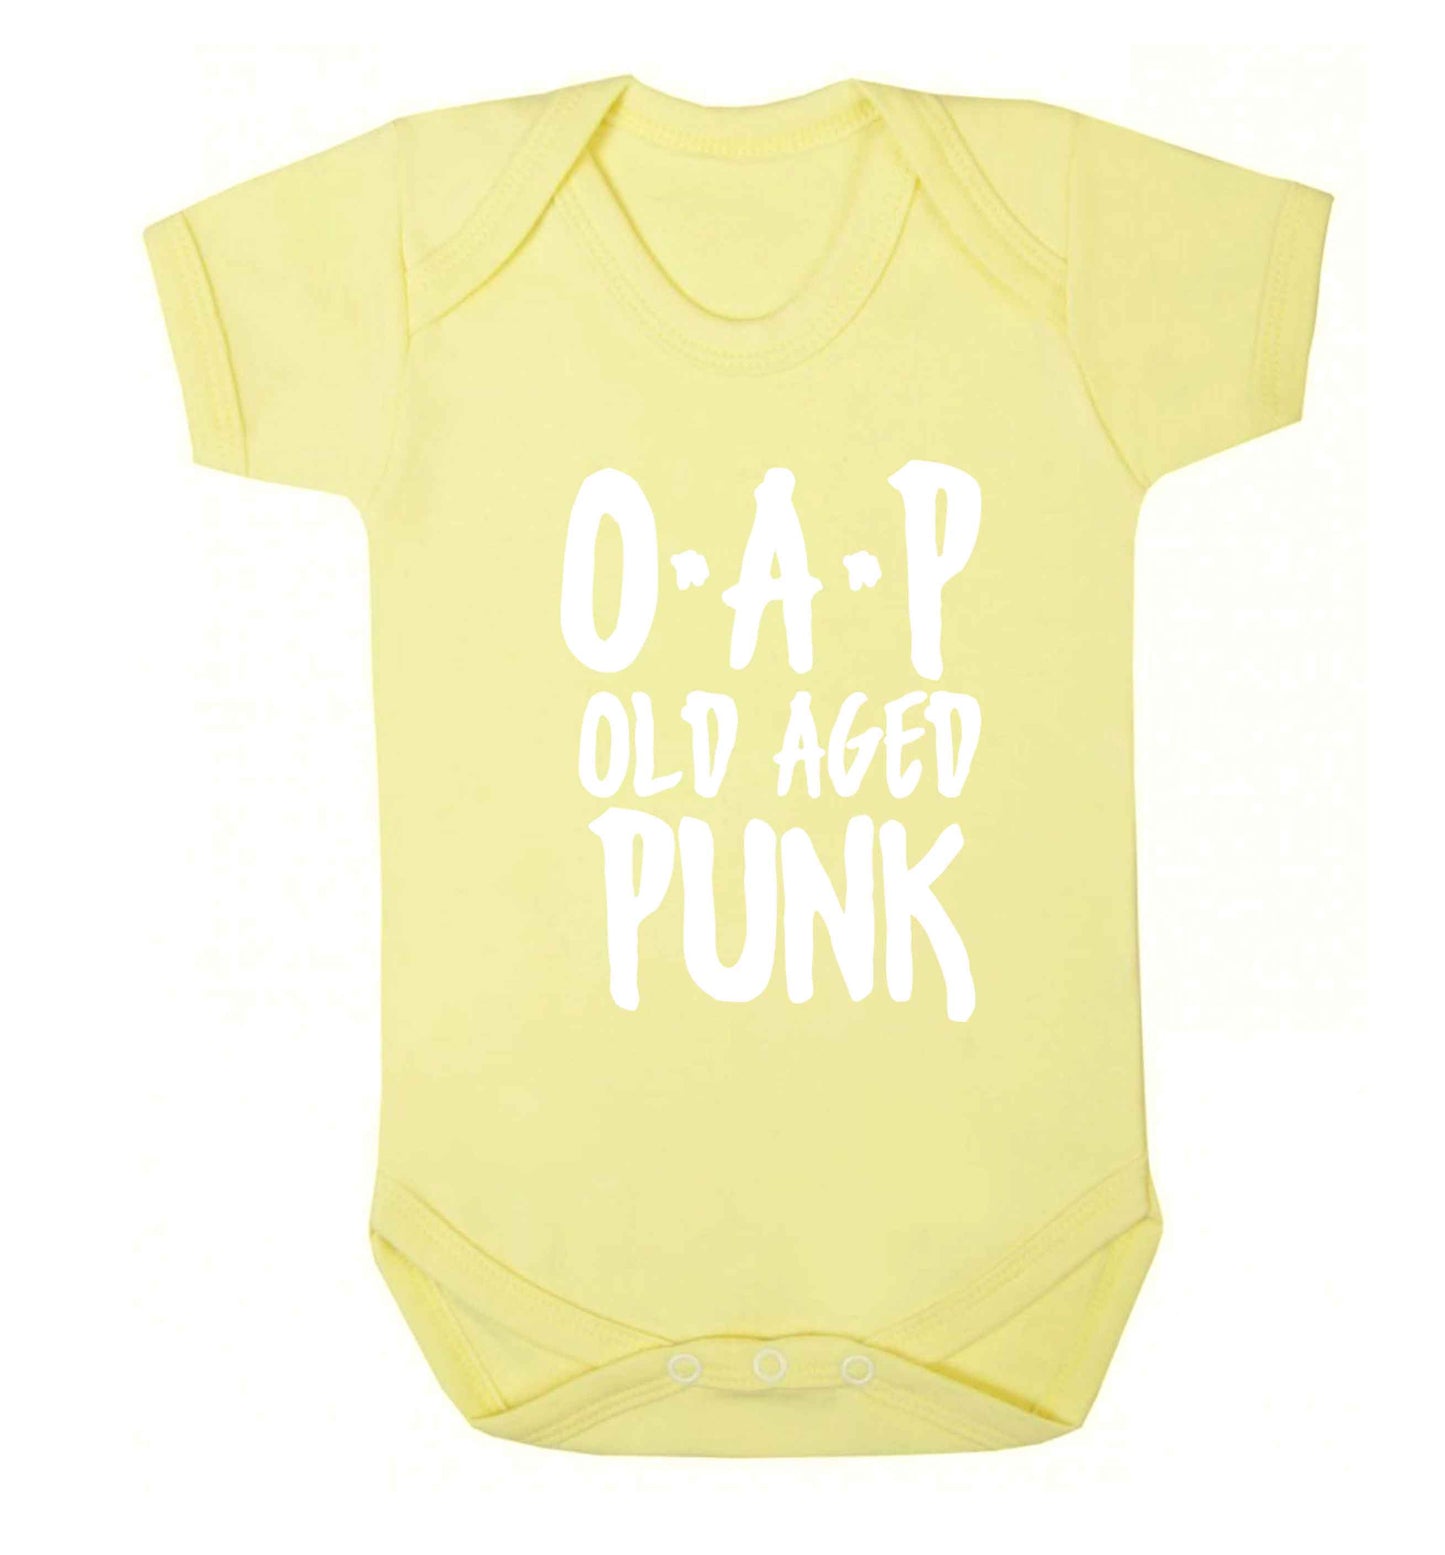 O.A.P Old Age Punk Baby Vest pale yellow 18-24 months